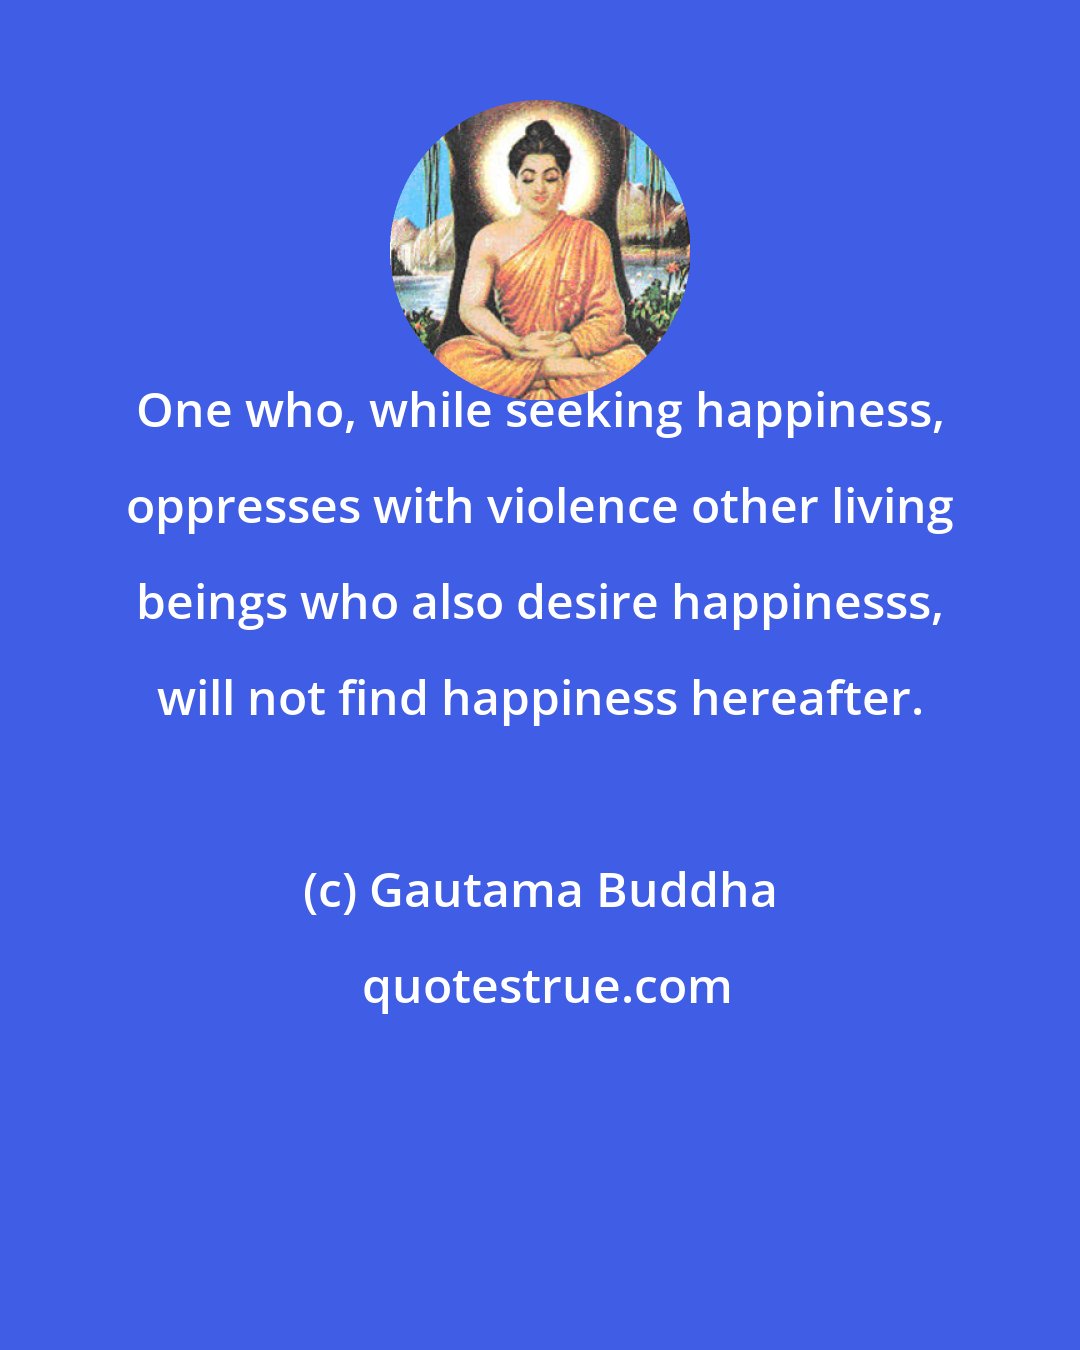 Gautama Buddha: One who, while seeking happiness, oppresses with violence other living beings who also desire happinesss, will not find happiness hereafter.